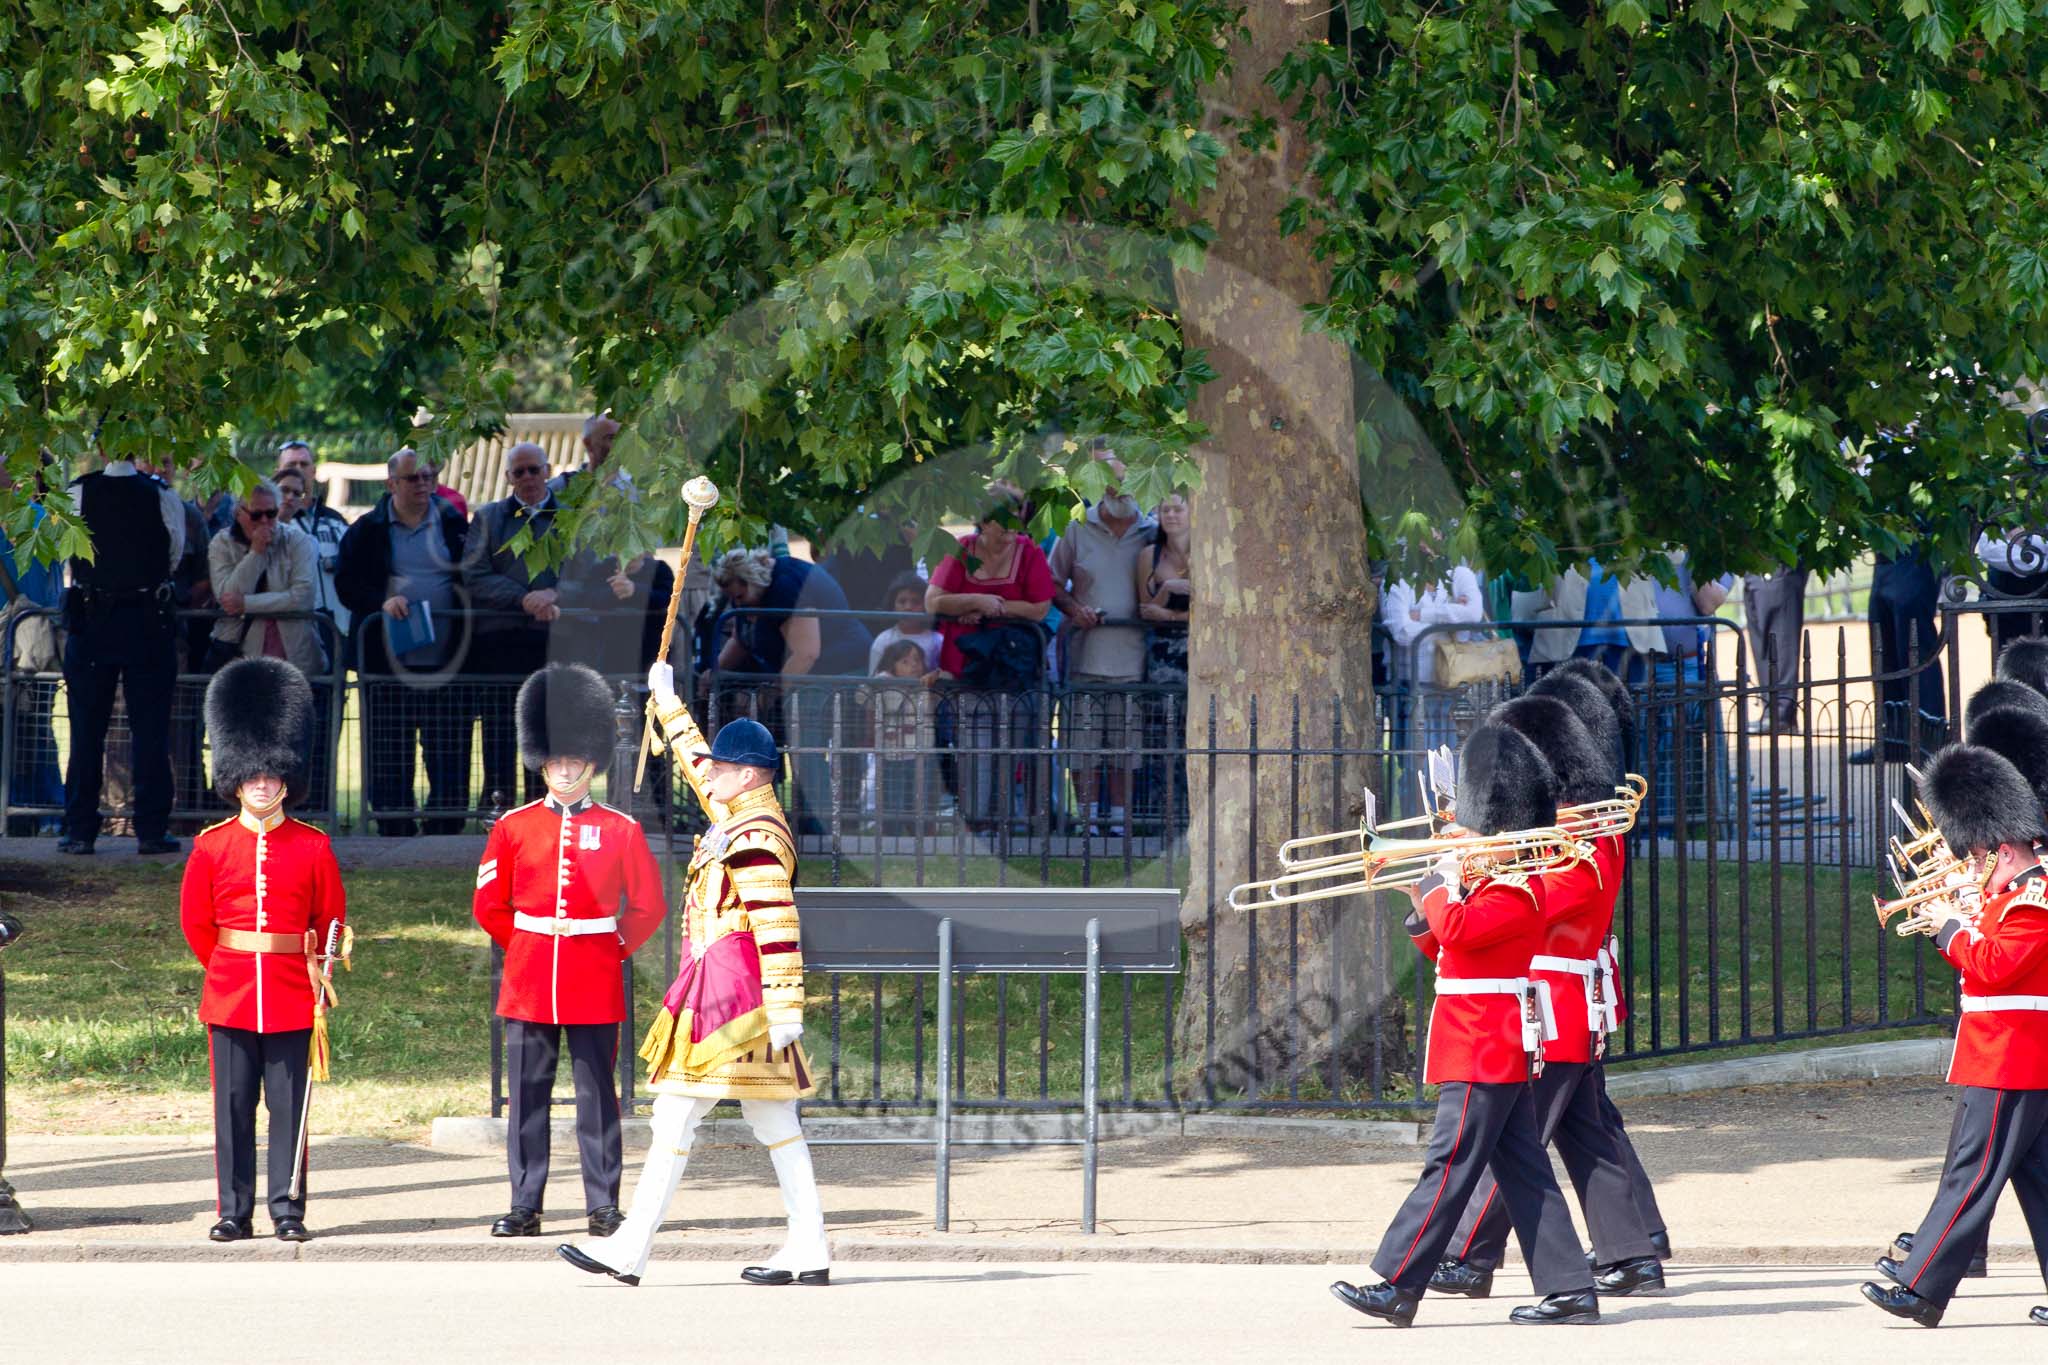 The Colonel's Review 2011: Drum Major Scott Fitzgerald, Coldstream Guards, leading the Band of the Coldstream Guards onto the parade ground, passing spectators watching from St. James's Park..
Horse Guards Parade, Westminster,
London SW1,

United Kingdom,
on 04 June 2011 at 10:25, image #23